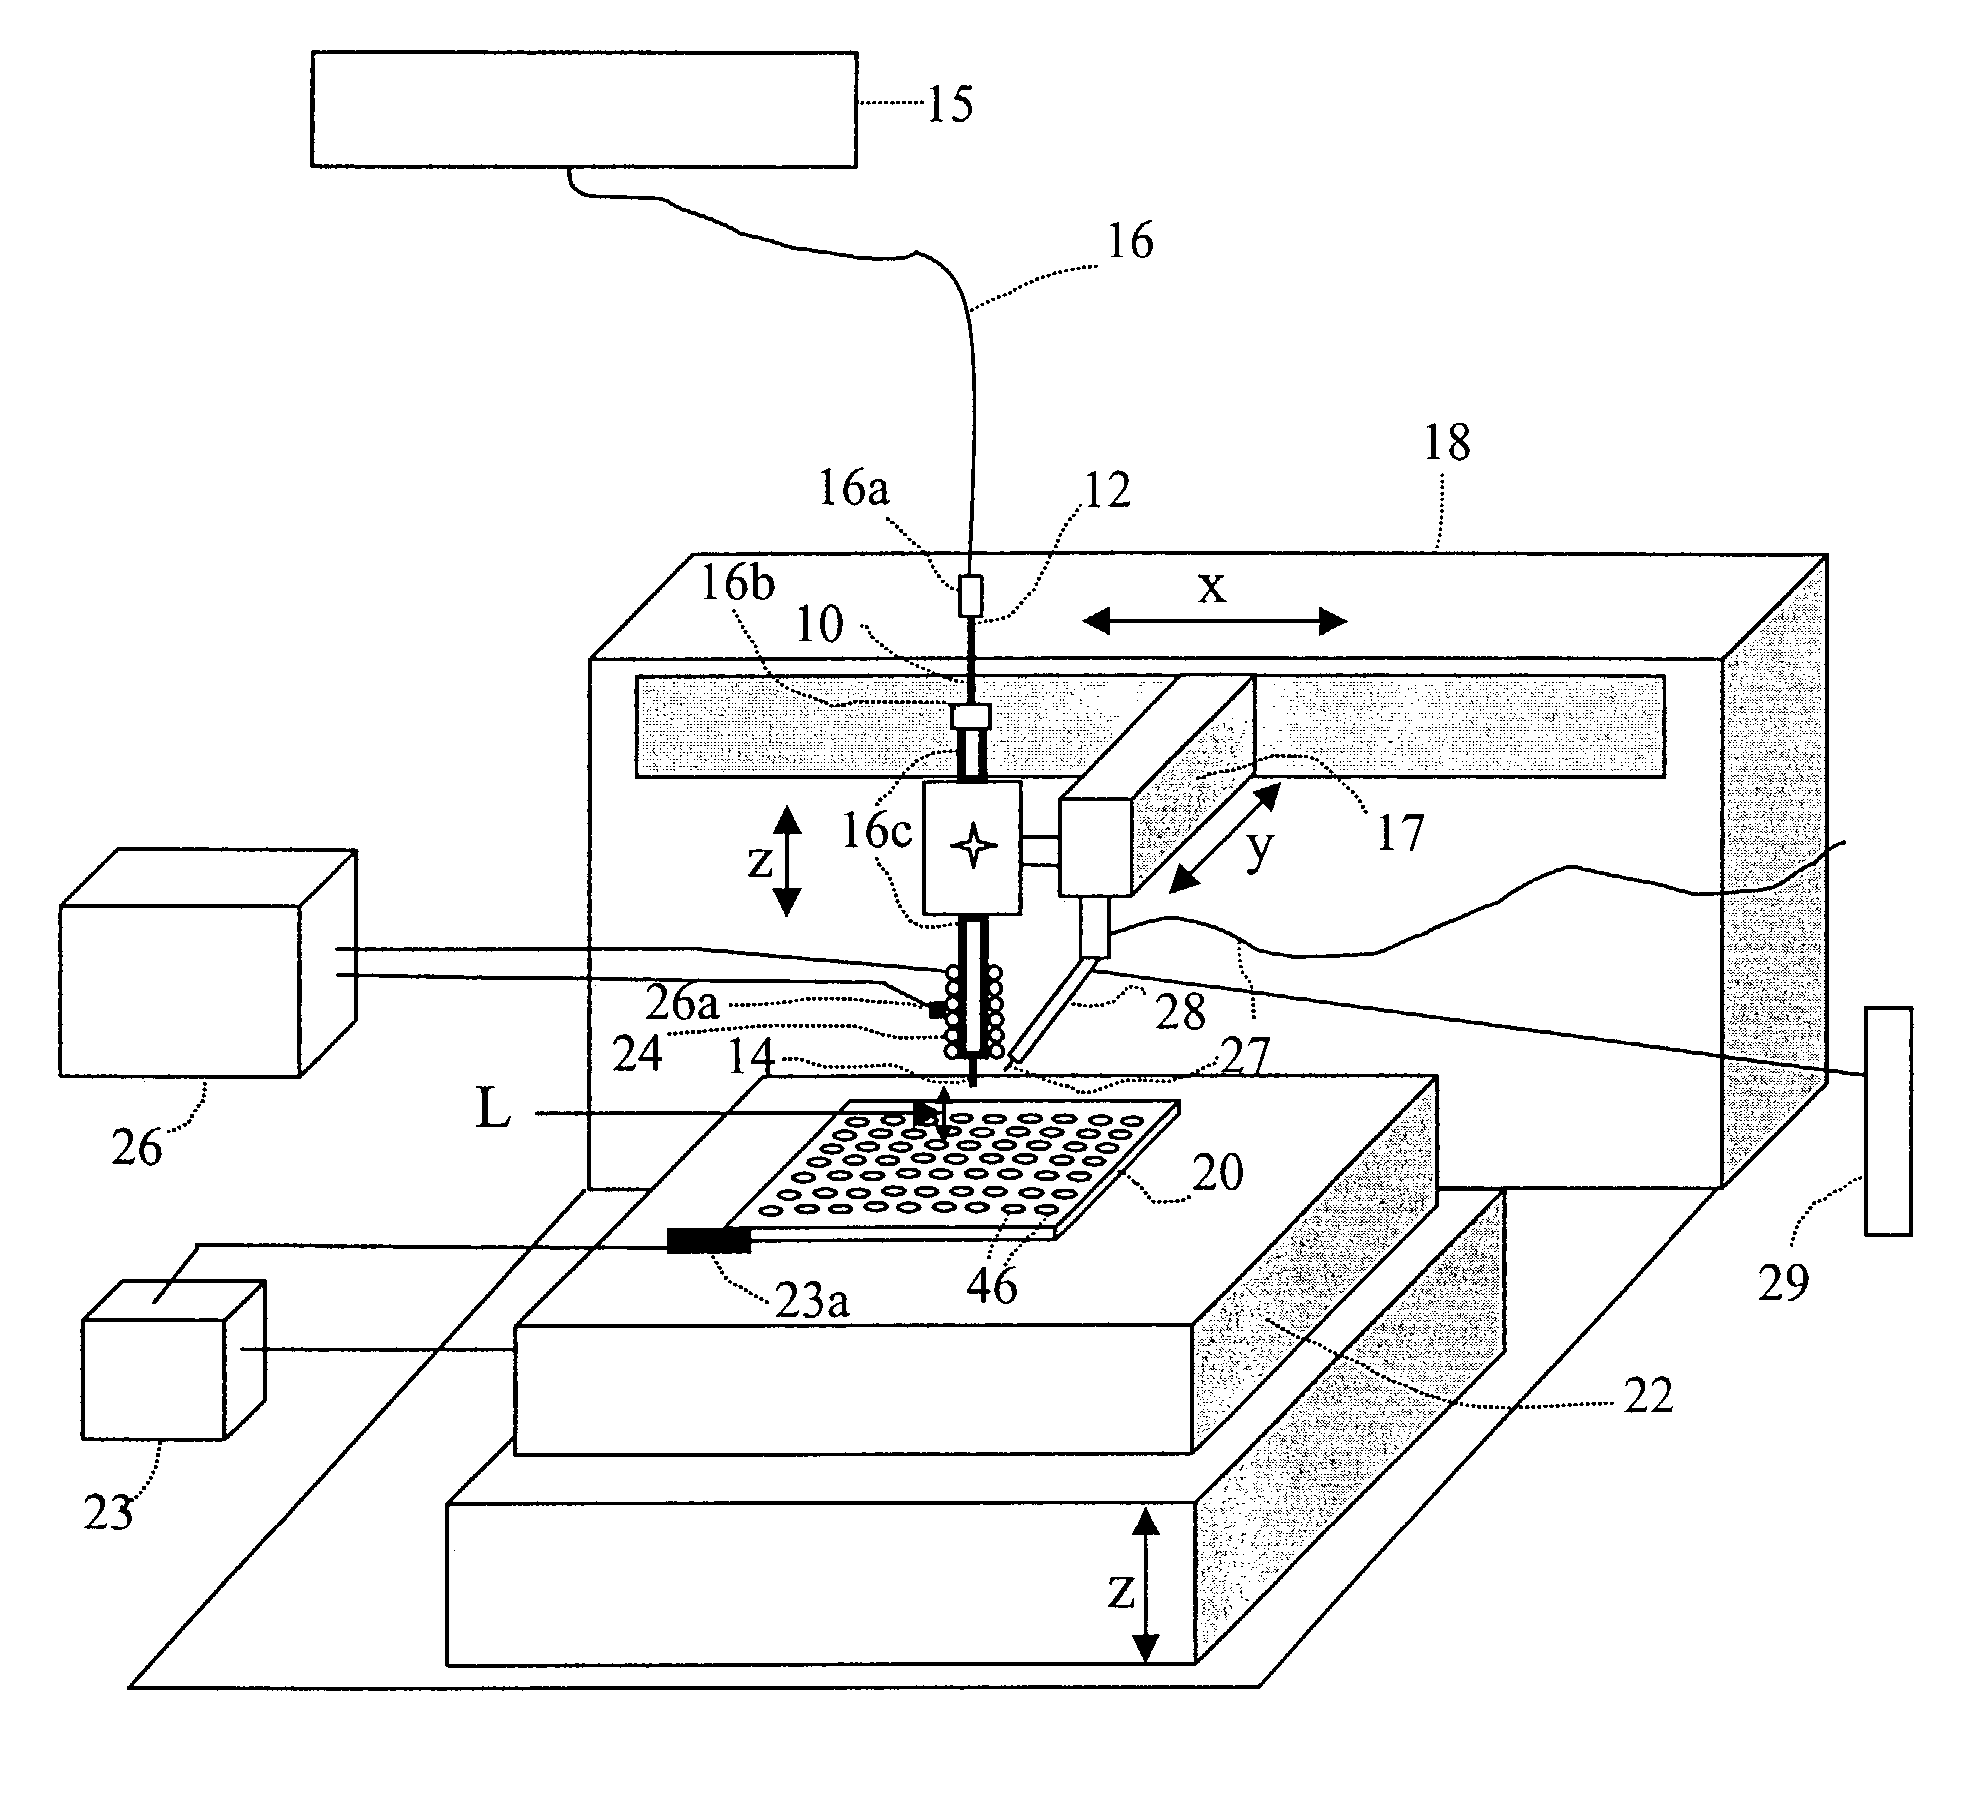 Apparatus and method for concentrating and collecting analytes from a flowing liquid stream